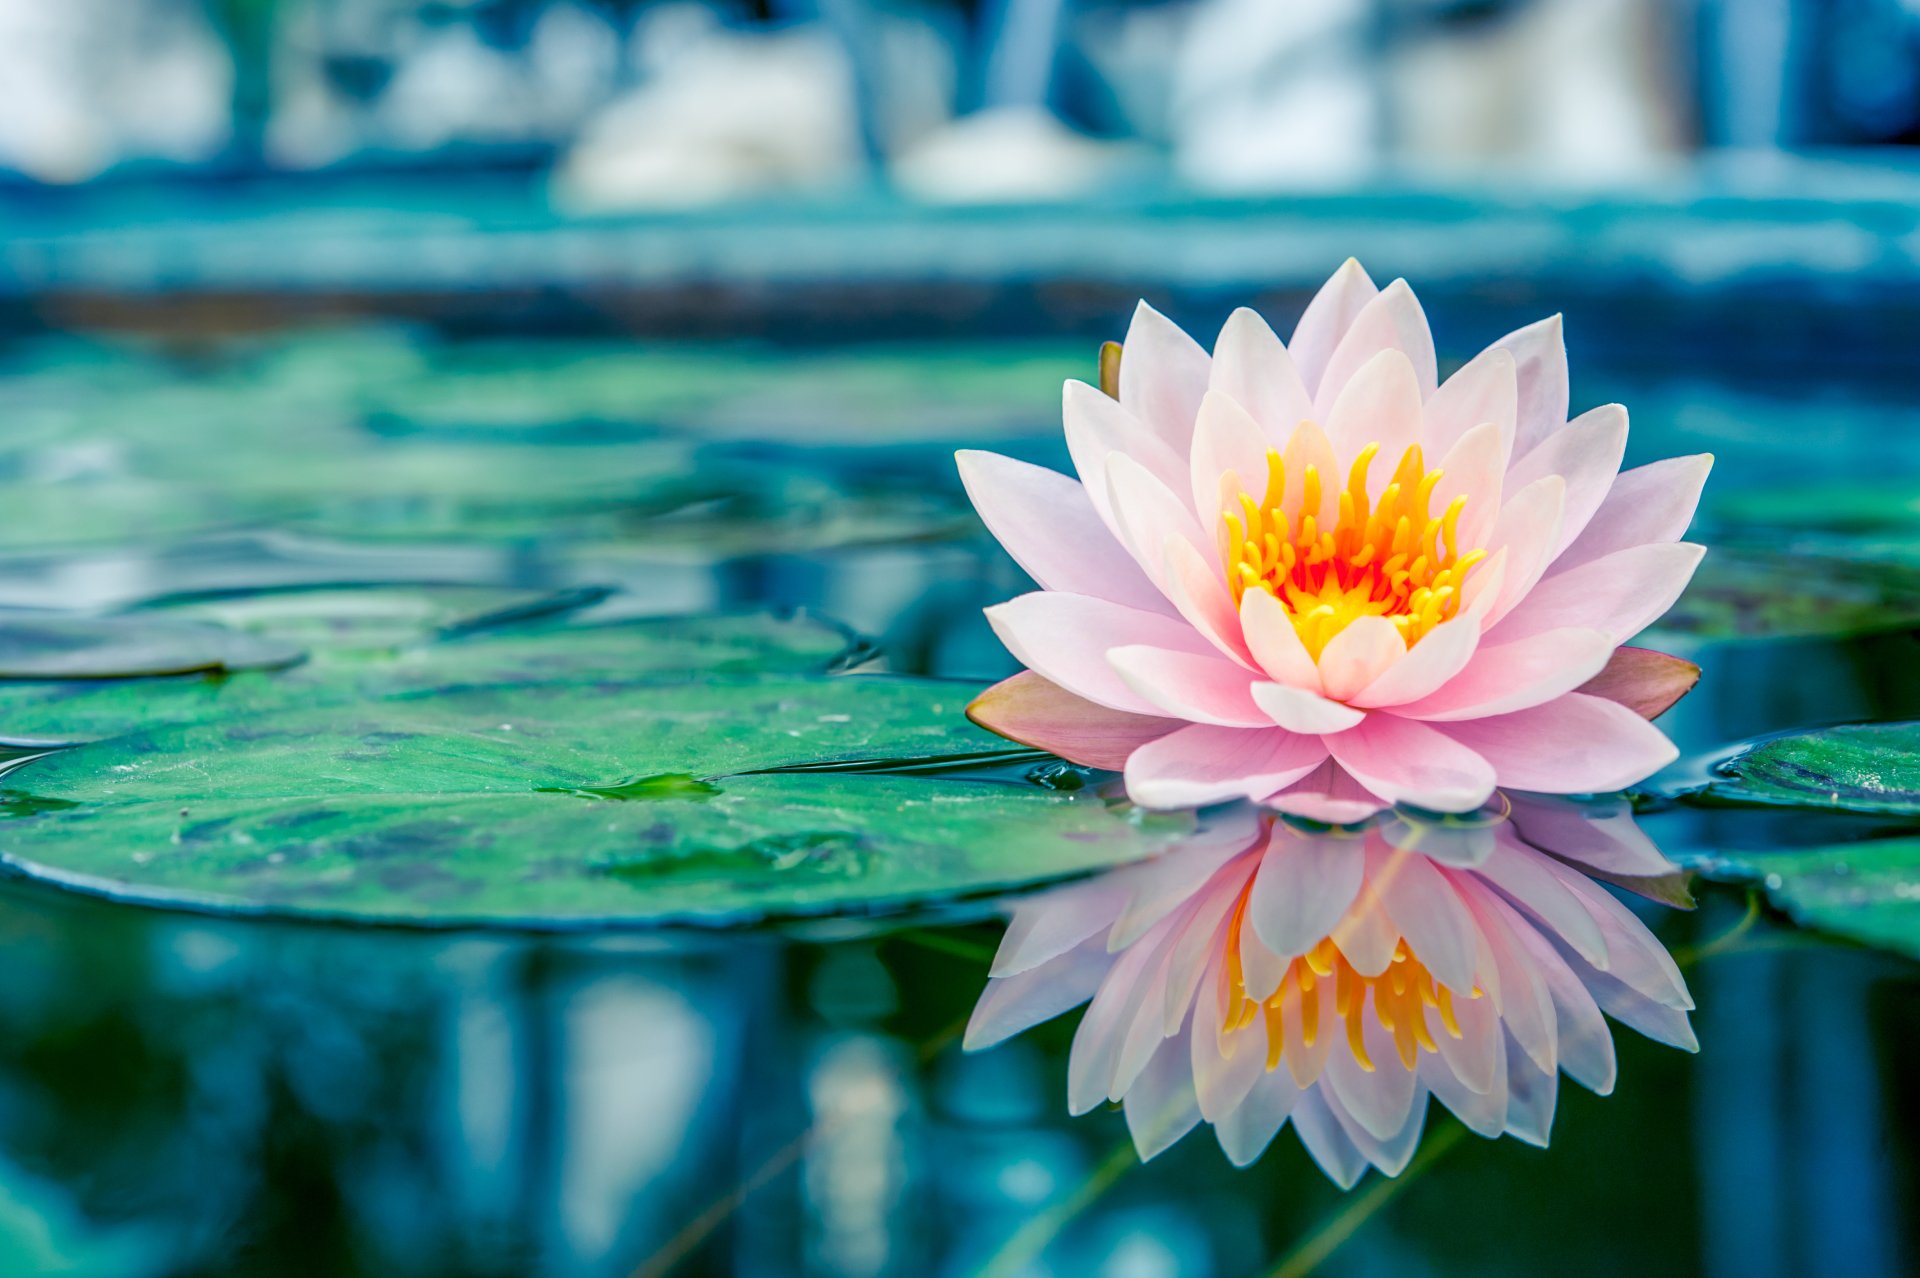 water lily wallpaper,flower,fragrant white water lily,petal,aquatic plant,sacred lotus